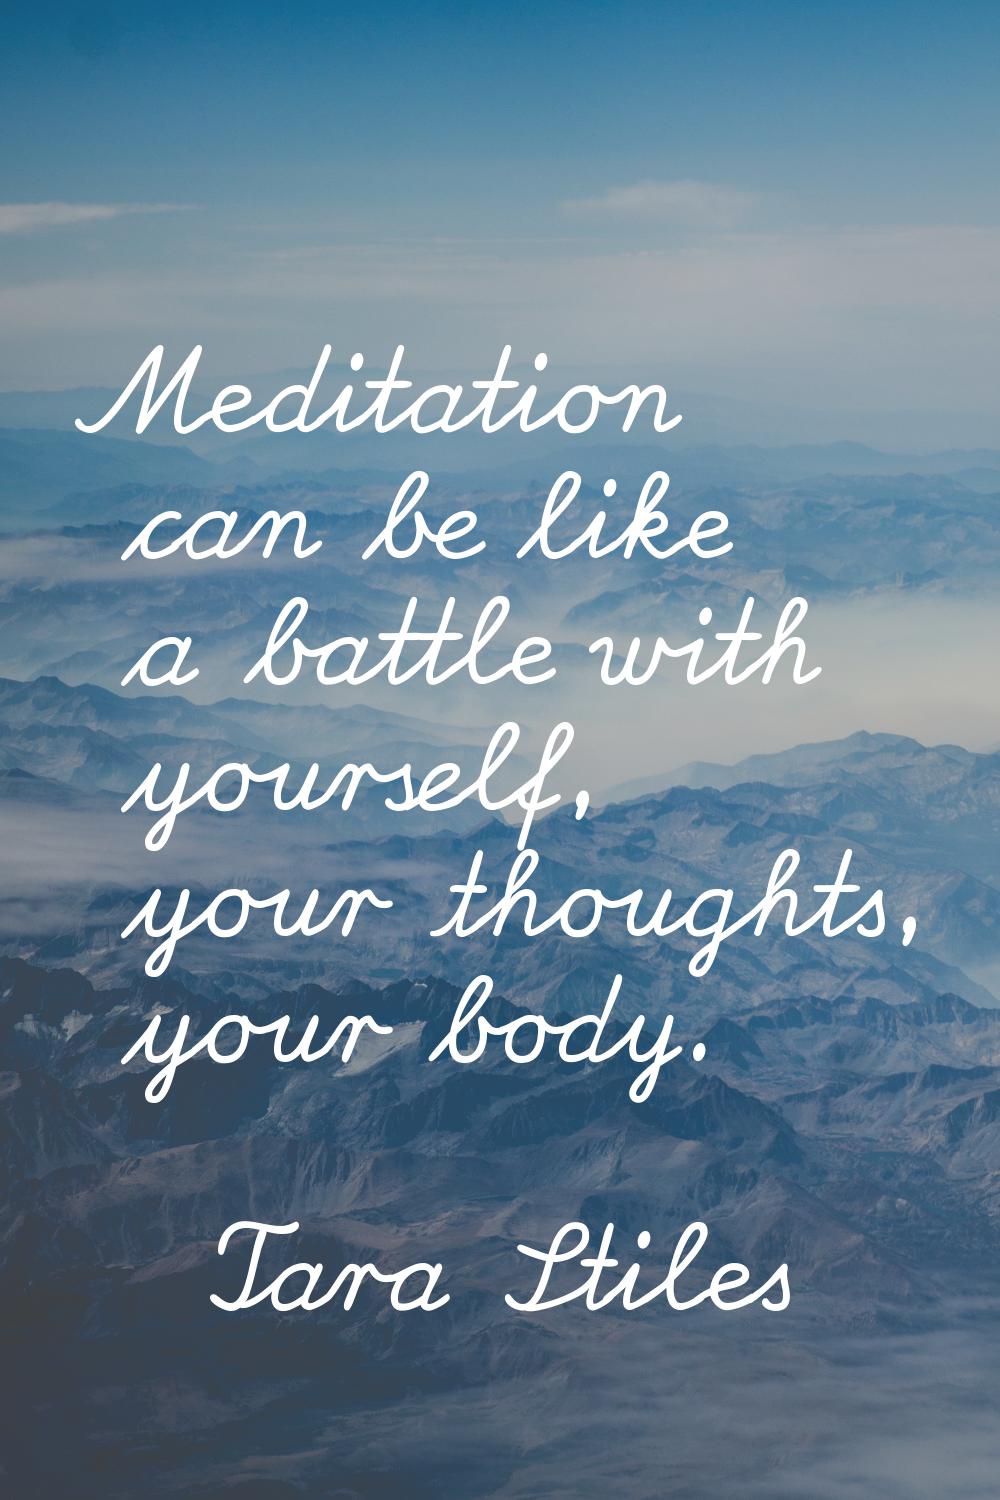 Meditation can be like a battle with yourself, your thoughts, your body.